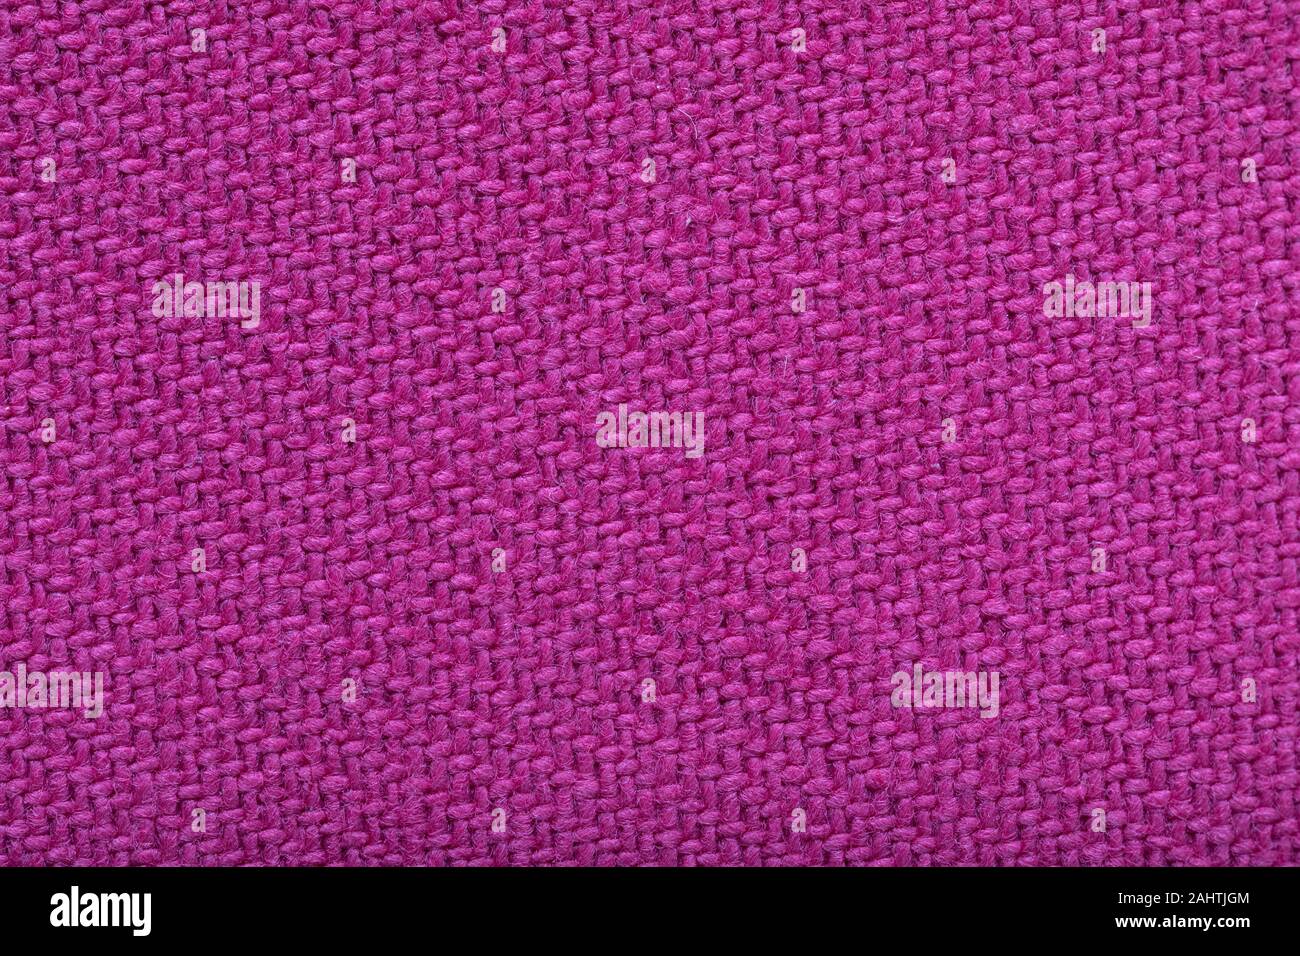 twill weaving fabric, pink stitches as a pattern, tissue structure closeup. Stock Photo